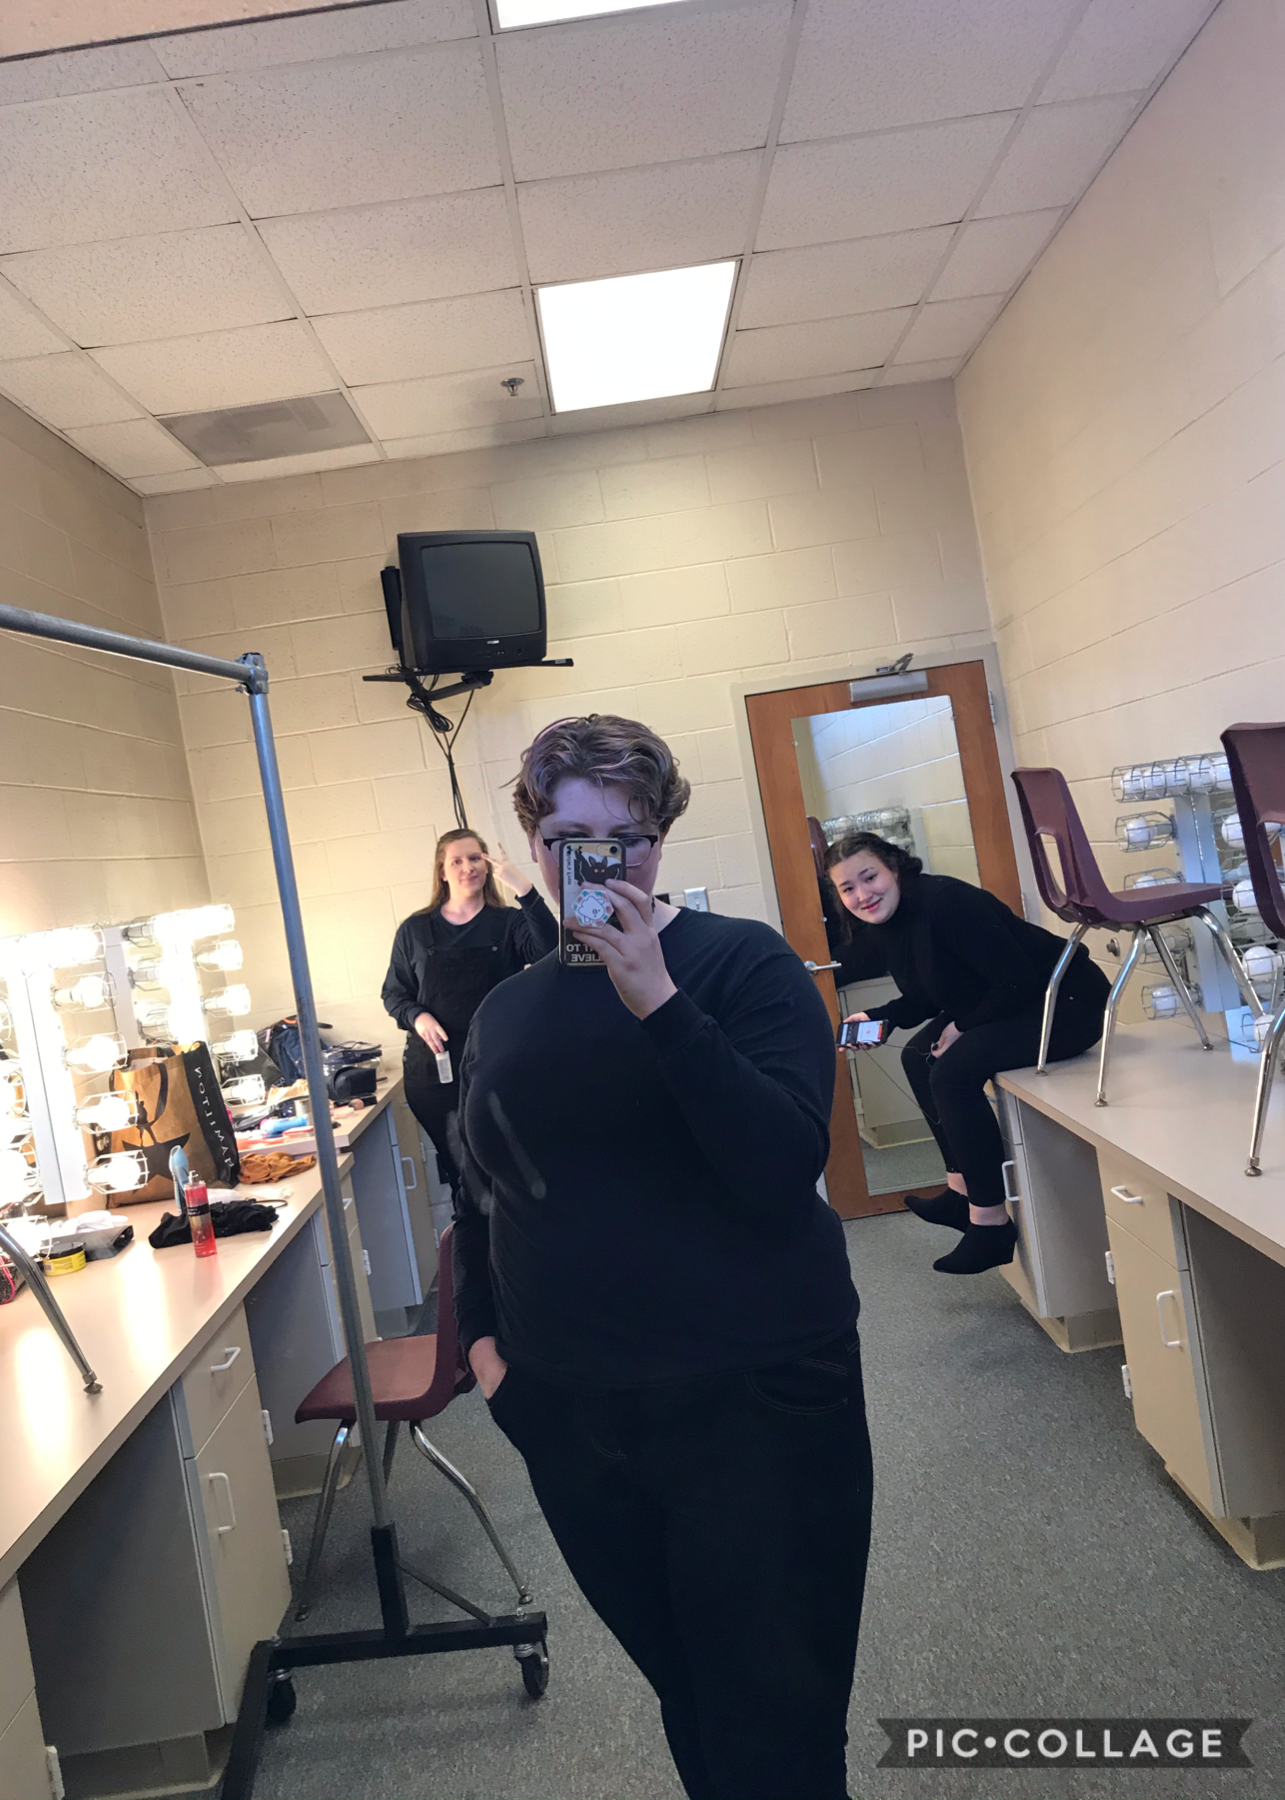 dressing room photos!!! (i’m the one taking the picture lmaö) so the performance on sunday went great!!! we went to chili’s afterward and it was good even tho i had to leave early lol